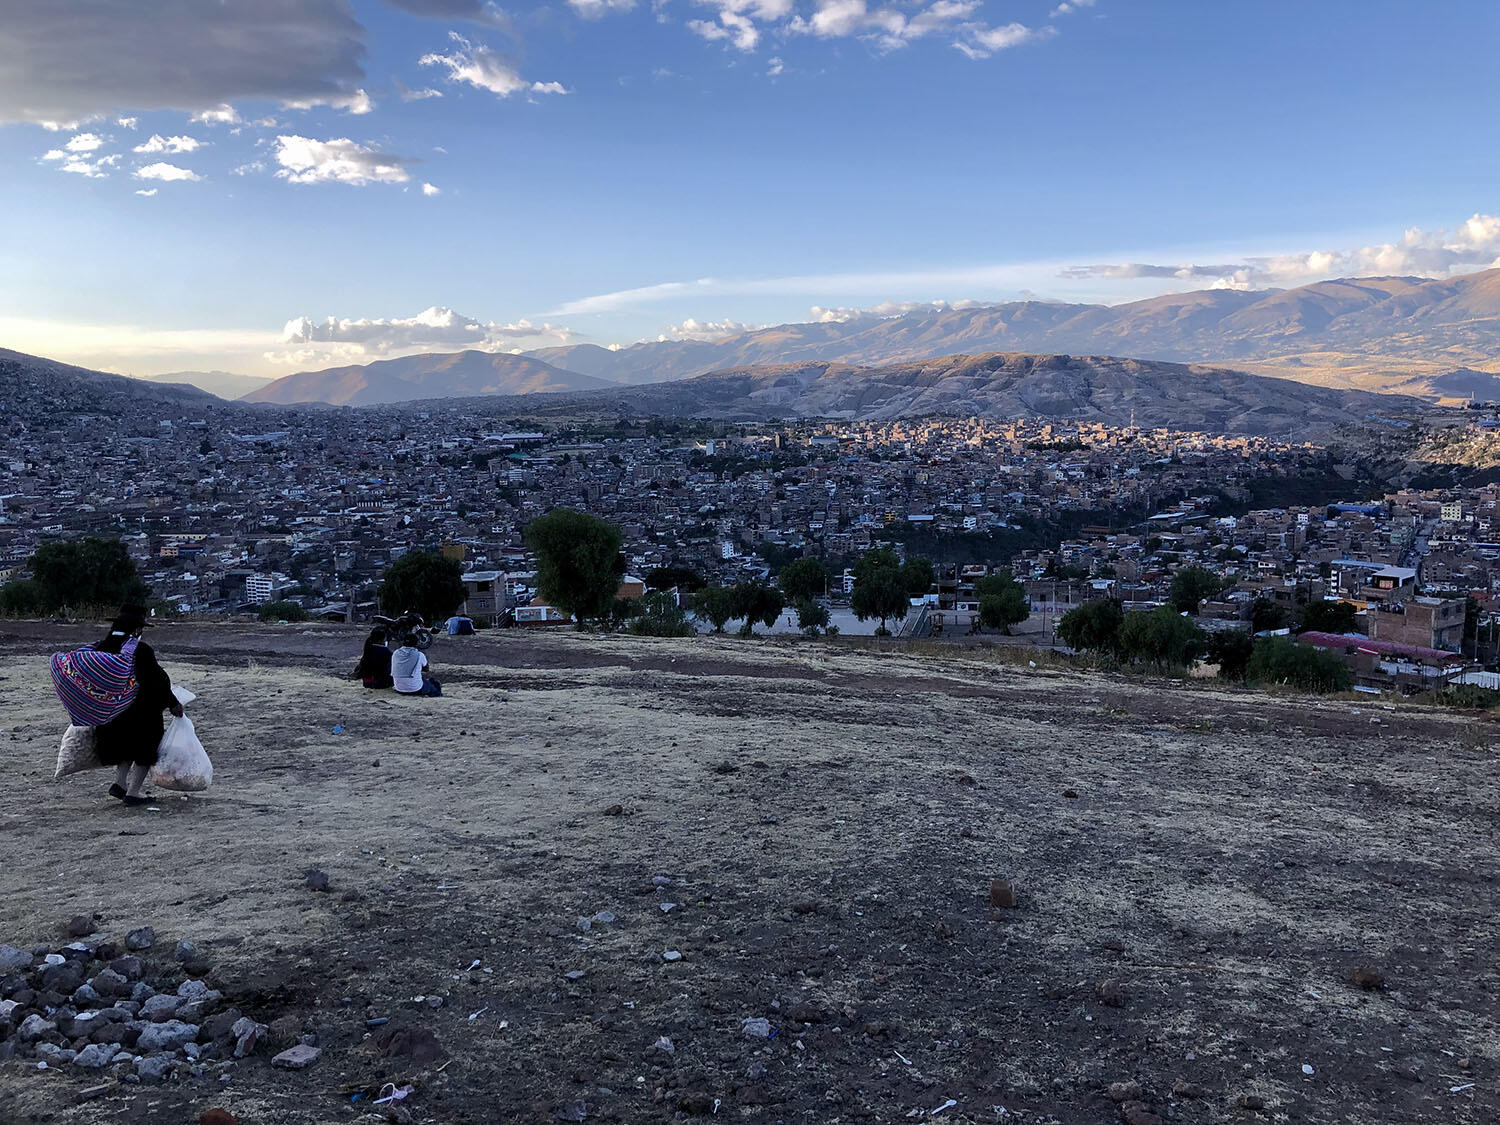 The city of Ayacucho from Mirador Acuchimay. (Photo by Emily Fjaellen Thompson.)